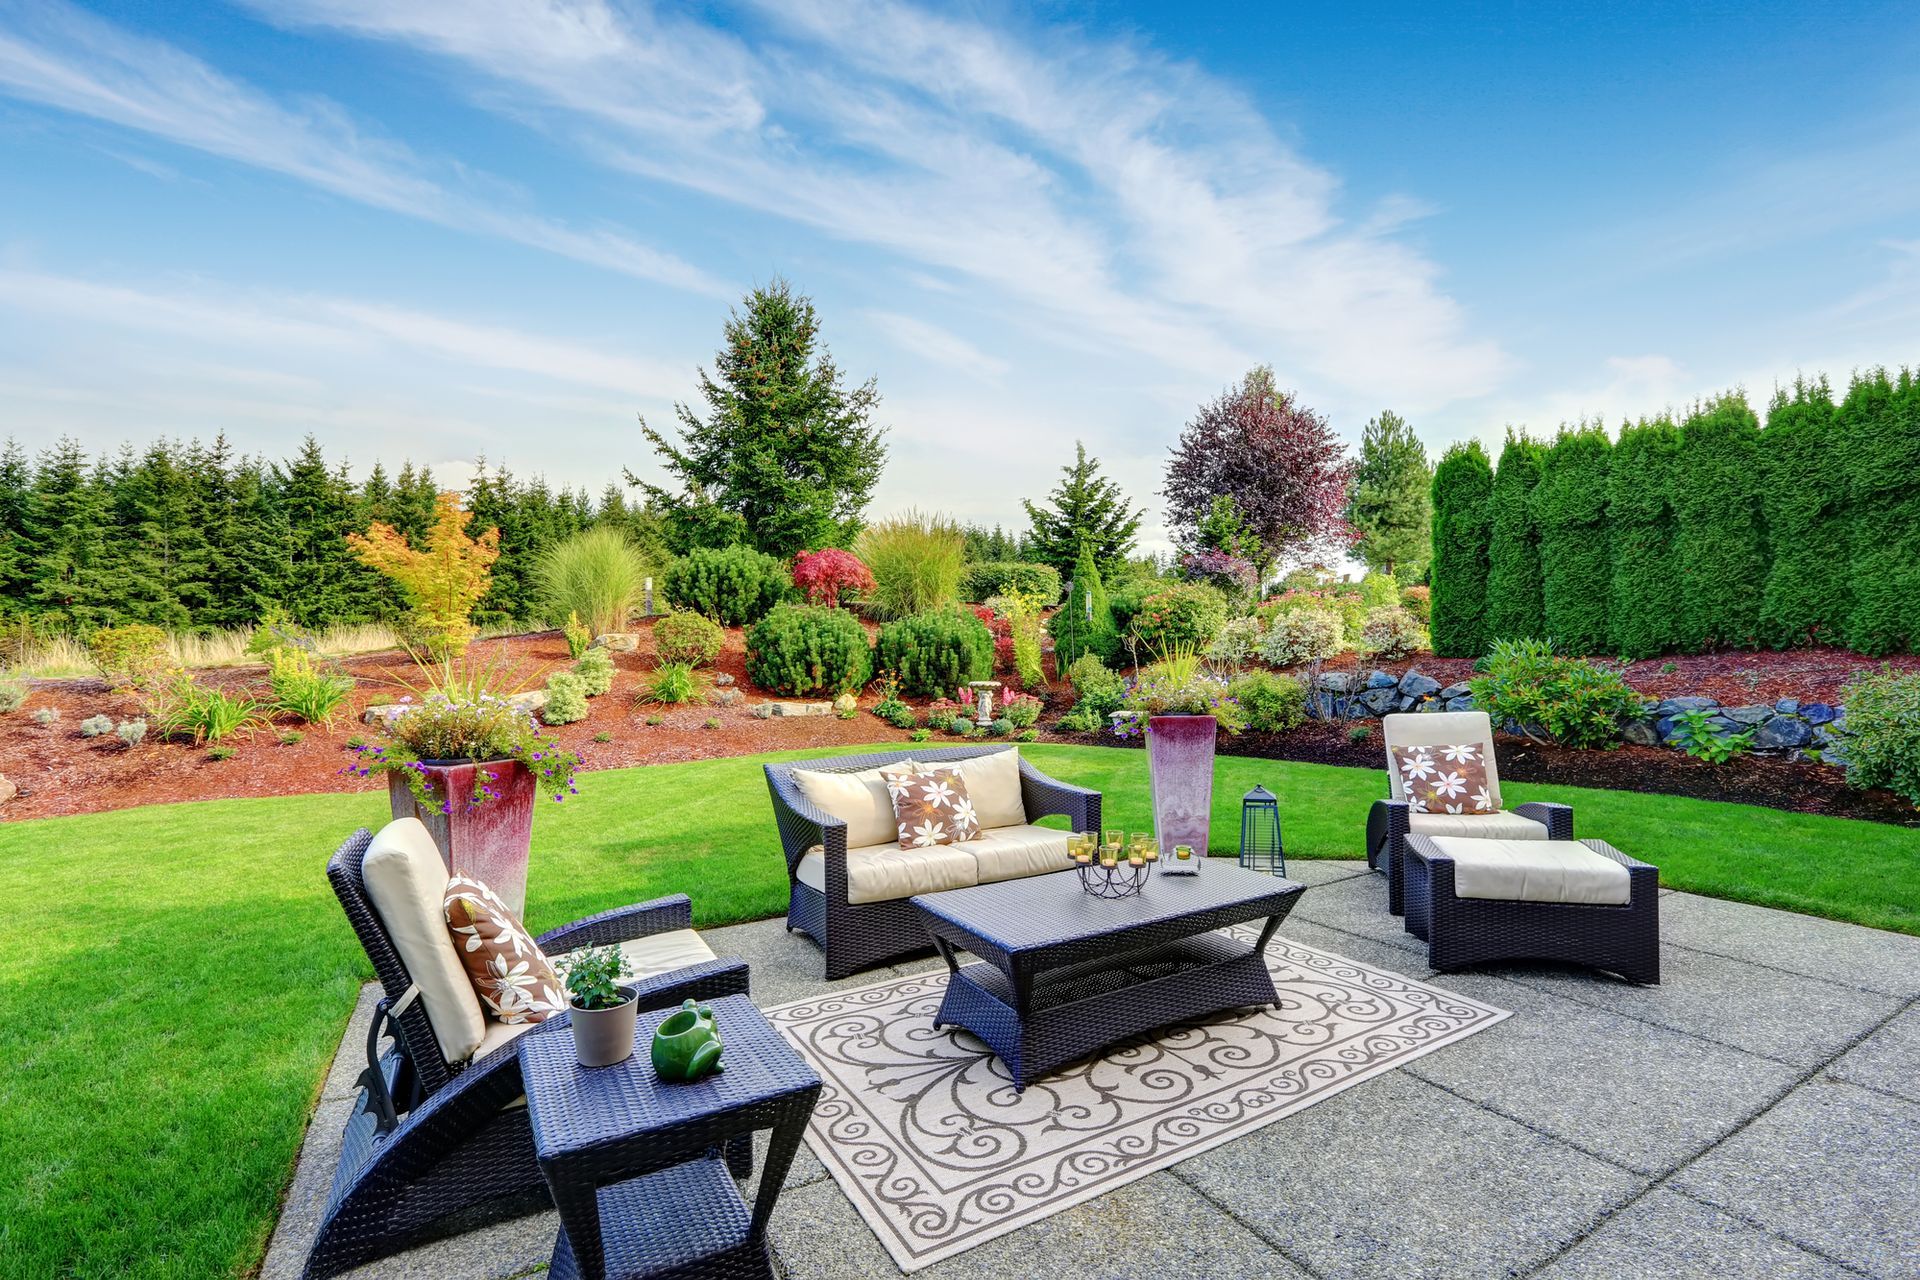 Landscape Ready for Unforgettable Backyard Parties and Adventures